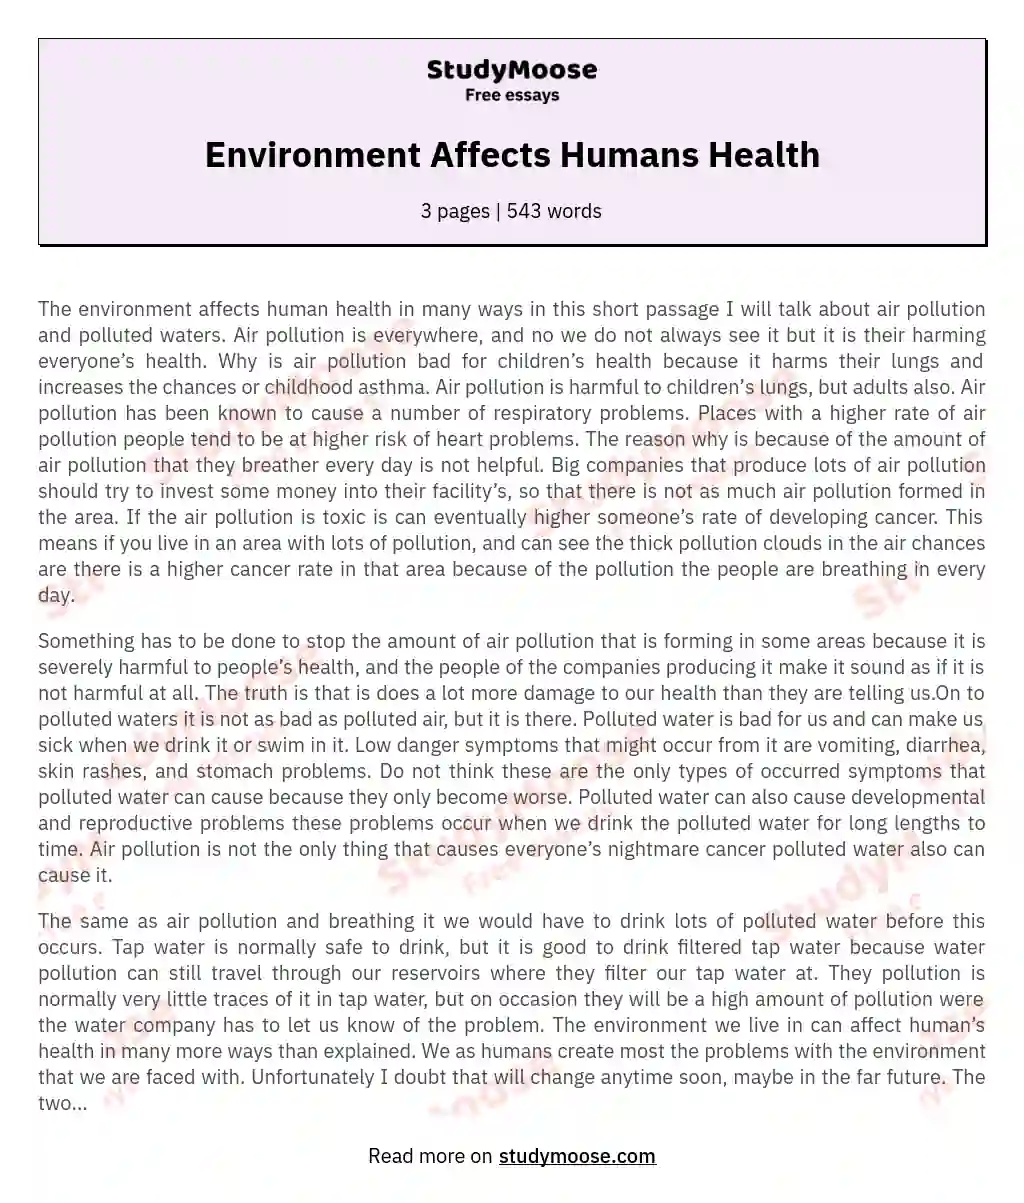 Environment Affects Humans Health essay